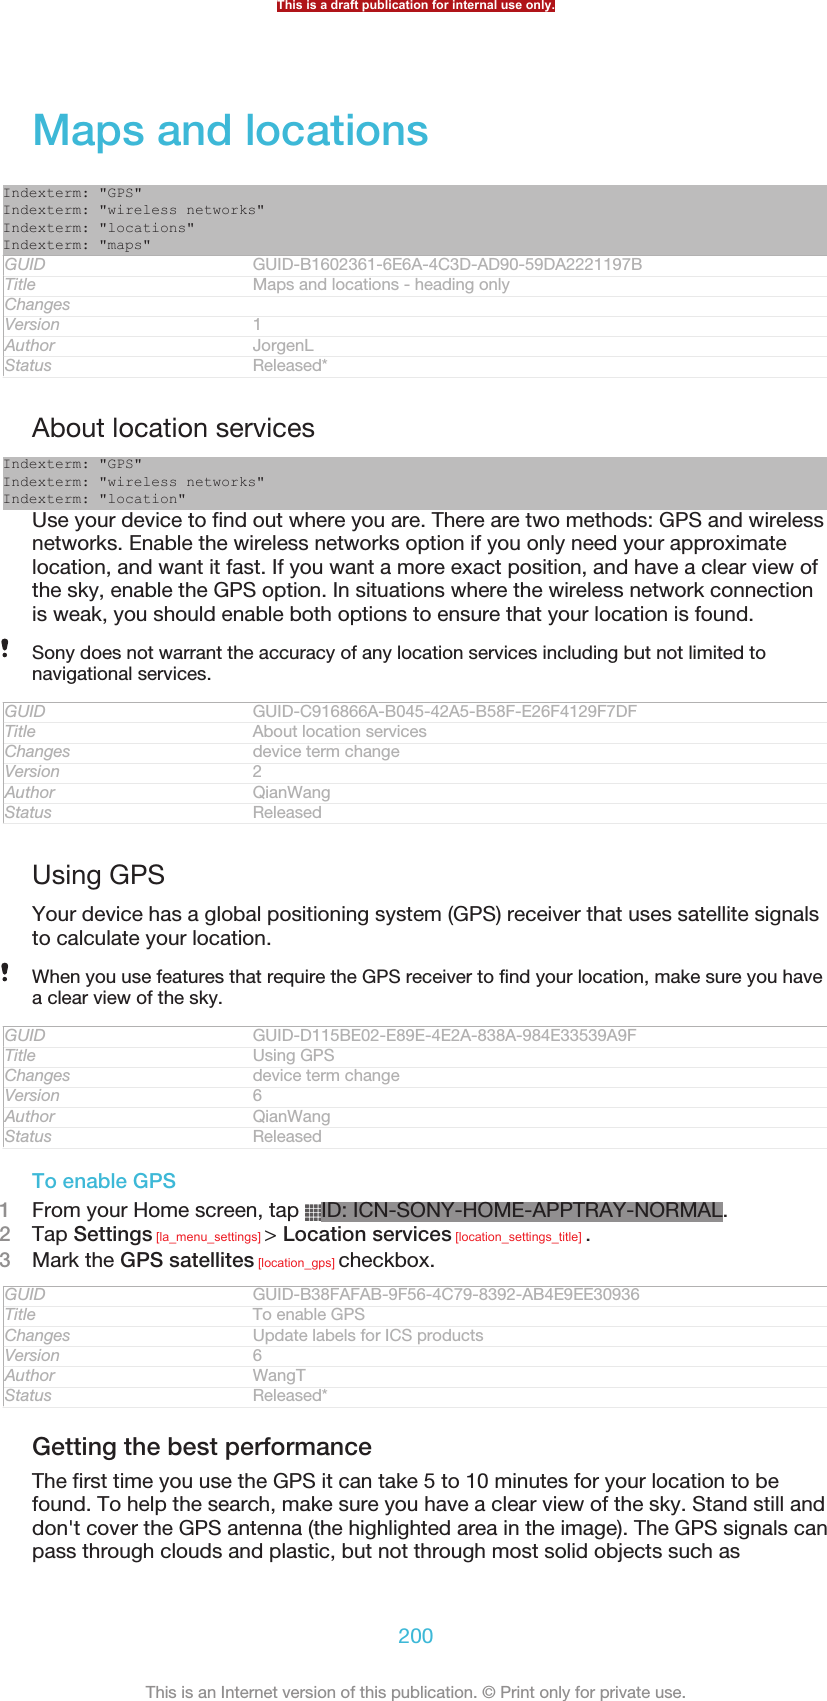 Maps and locationsIndexterm: &quot;GPS&quot;Indexterm: &quot;wireless networks&quot;Indexterm: &quot;locations&quot;Indexterm: &quot;maps&quot;GUID GUID-B1602361-6E6A-4C3D-AD90-59DA2221197BTitle Maps and locations - heading onlyChangesVersion 1Author JorgenLStatus Released*About location servicesIndexterm: &quot;GPS&quot;Indexterm: &quot;wireless networks&quot;Indexterm: &quot;location&quot;Use your device to find out where you are. There are two methods: GPS and wirelessnetworks. Enable the wireless networks option if you only need your approximatelocation, and want it fast. If you want a more exact position, and have a clear view ofthe sky, enable the GPS option. In situations where the wireless network connectionis weak, you should enable both options to ensure that your location is found.Sony does not warrant the accuracy of any location services including but not limited tonavigational services.GUID GUID-C916866A-B045-42A5-B58F-E26F4129F7DFTitle About location servicesChanges device term changeVersion 2Author QianWangStatus ReleasedUsing GPSYour device has a global positioning system (GPS) receiver that uses satellite signalsto calculate your location.When you use features that require the GPS receiver to find your location, make sure you havea clear view of the sky.GUID GUID-D115BE02-E89E-4E2A-838A-984E33539A9FTitle Using GPSChanges device term changeVersion 6Author QianWangStatus ReleasedTo enable GPS1From your Home screen, tap  ID: ICN-SONY-HOME-APPTRAY-NORMAL.2Tap Settings [la_menu_settings] &gt; Location services [location_settings_title] .3Mark the GPS satellites [location_gps] checkbox.GUID GUID-B38FAFAB-9F56-4C79-8392-AB4E9EE30936Title To enable GPSChanges Update labels for ICS productsVersion 6Author WangTStatus Released*Getting the best performanceThe first time you use the GPS it can take 5 to 10 minutes for your location to befound. To help the search, make sure you have a clear view of the sky. Stand still anddon&apos;t cover the GPS antenna (the highlighted area in the image). The GPS signals canpass through clouds and plastic, but not through most solid objects such asThis is a draft publication for internal use only.200This is an Internet version of this publication. © Print only for private use.